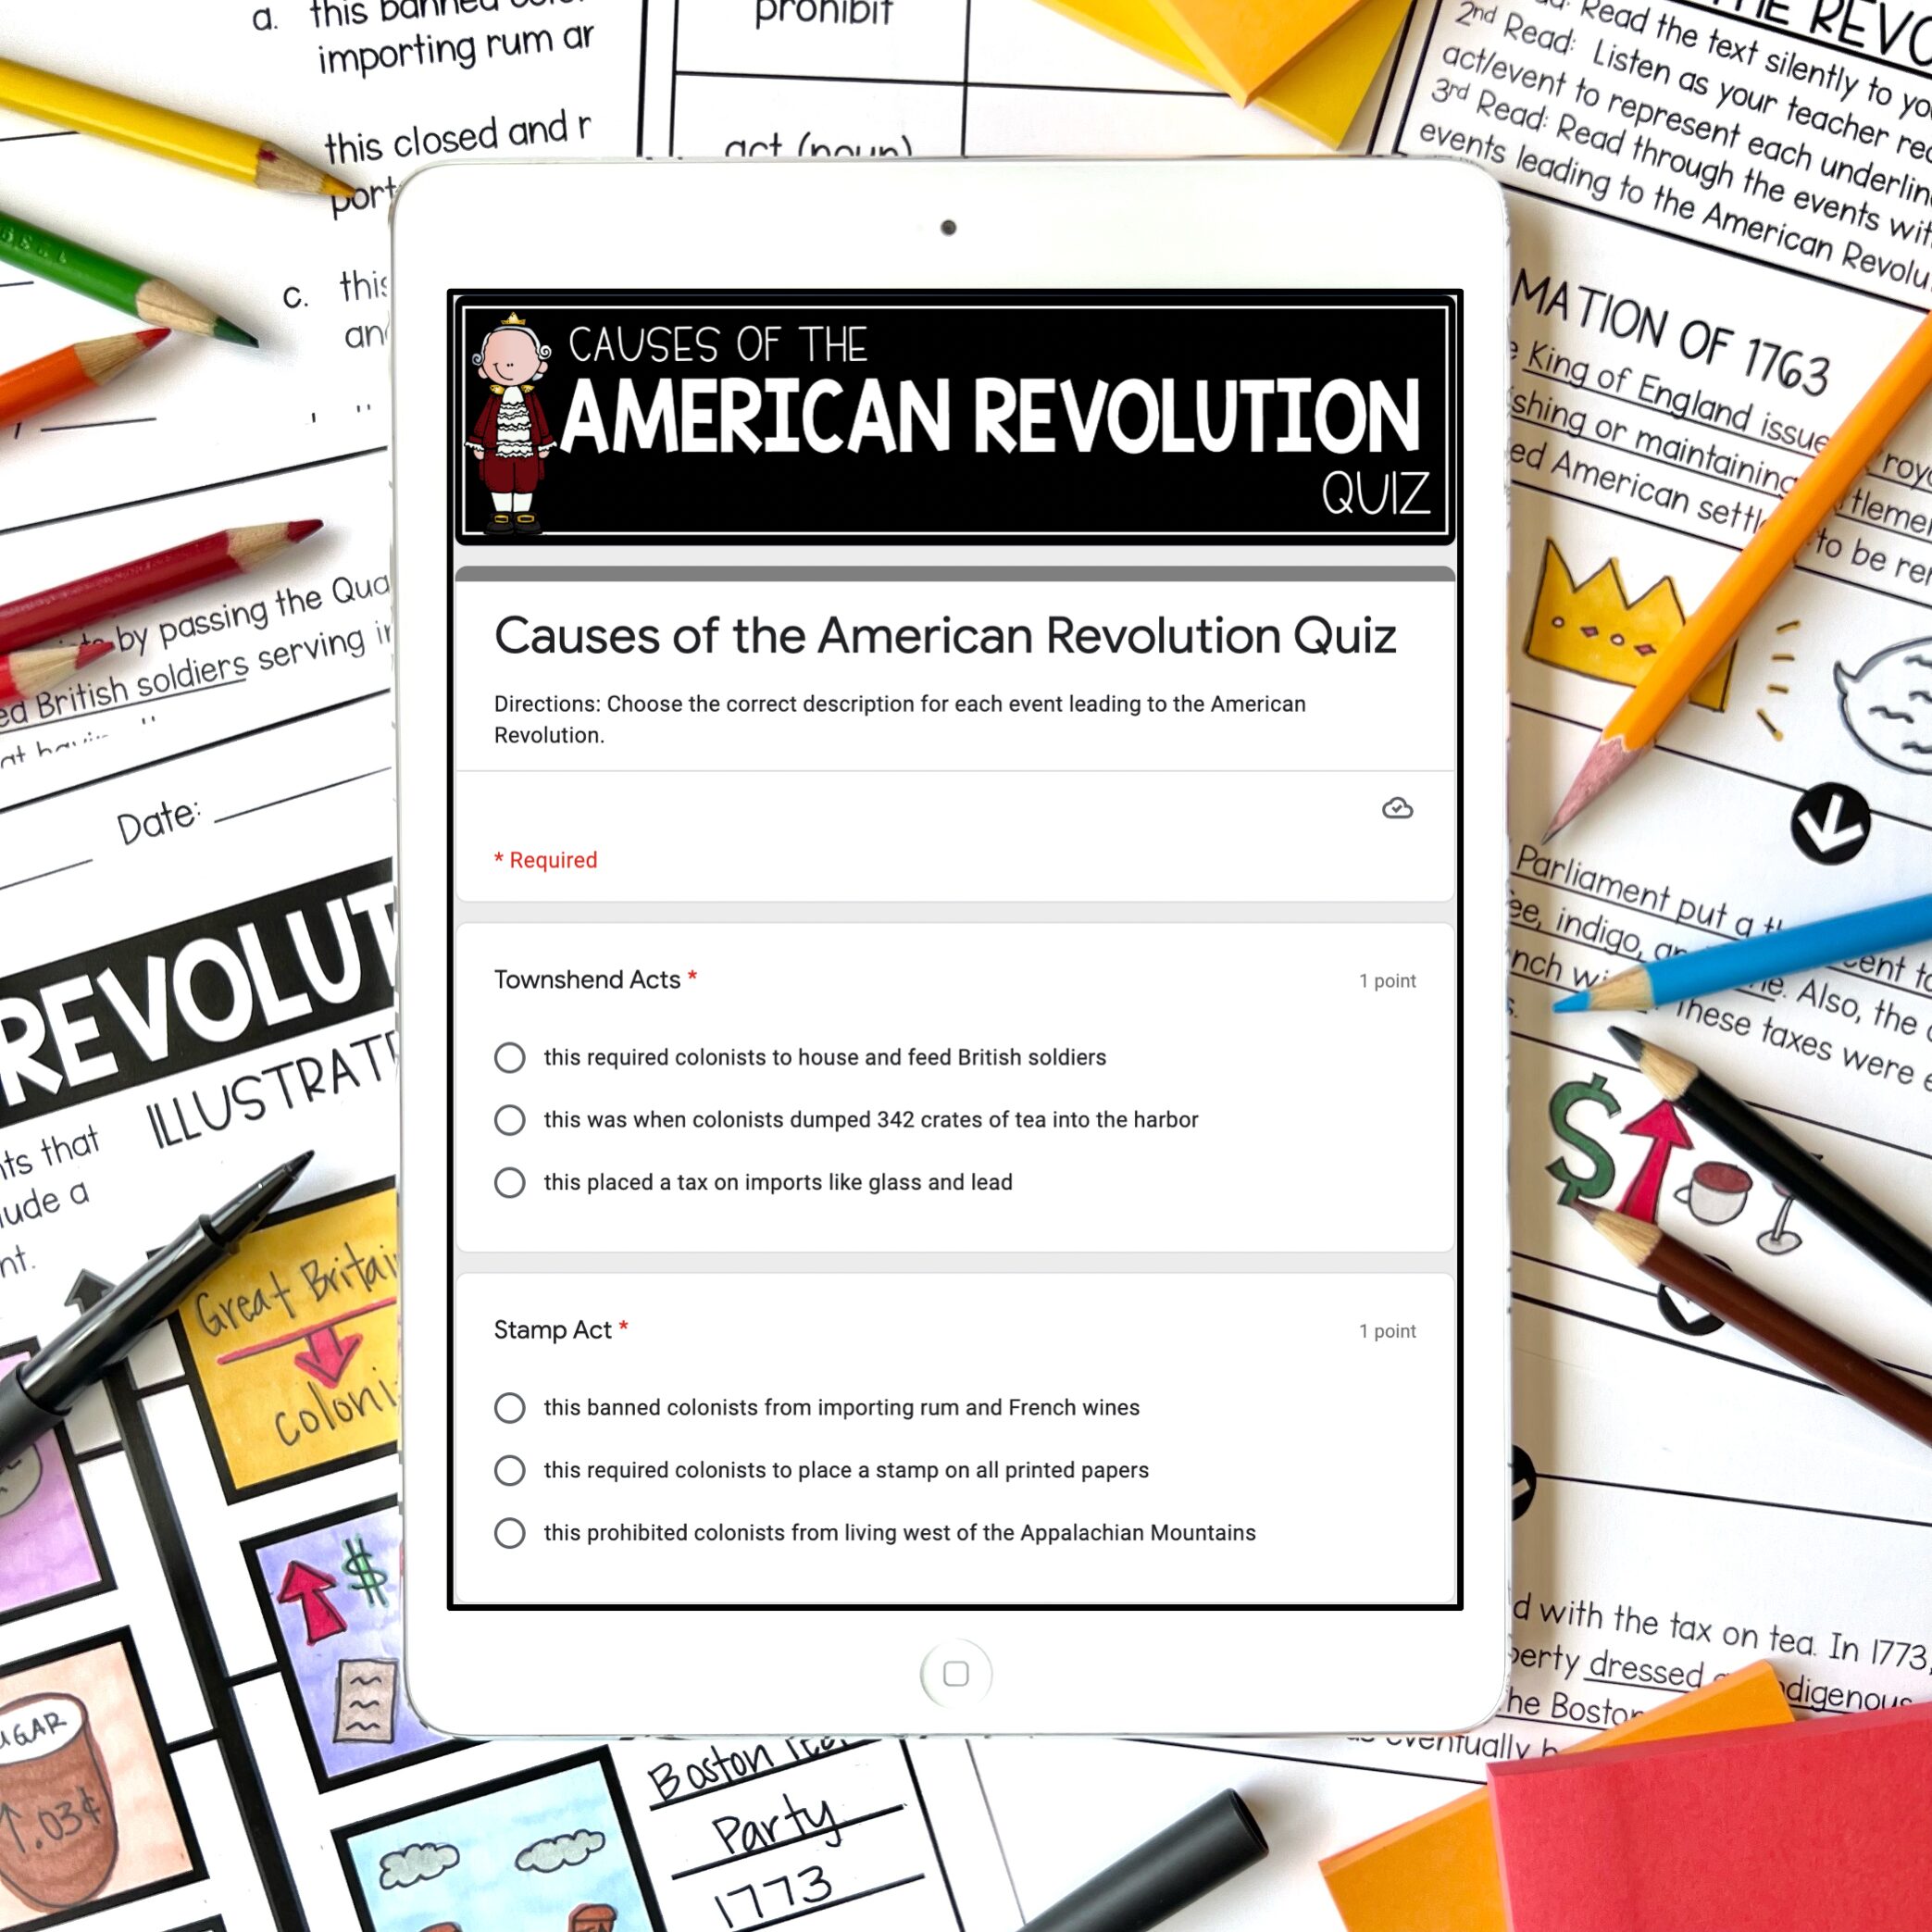 Causes of the American Revolution Google Forms Quiz